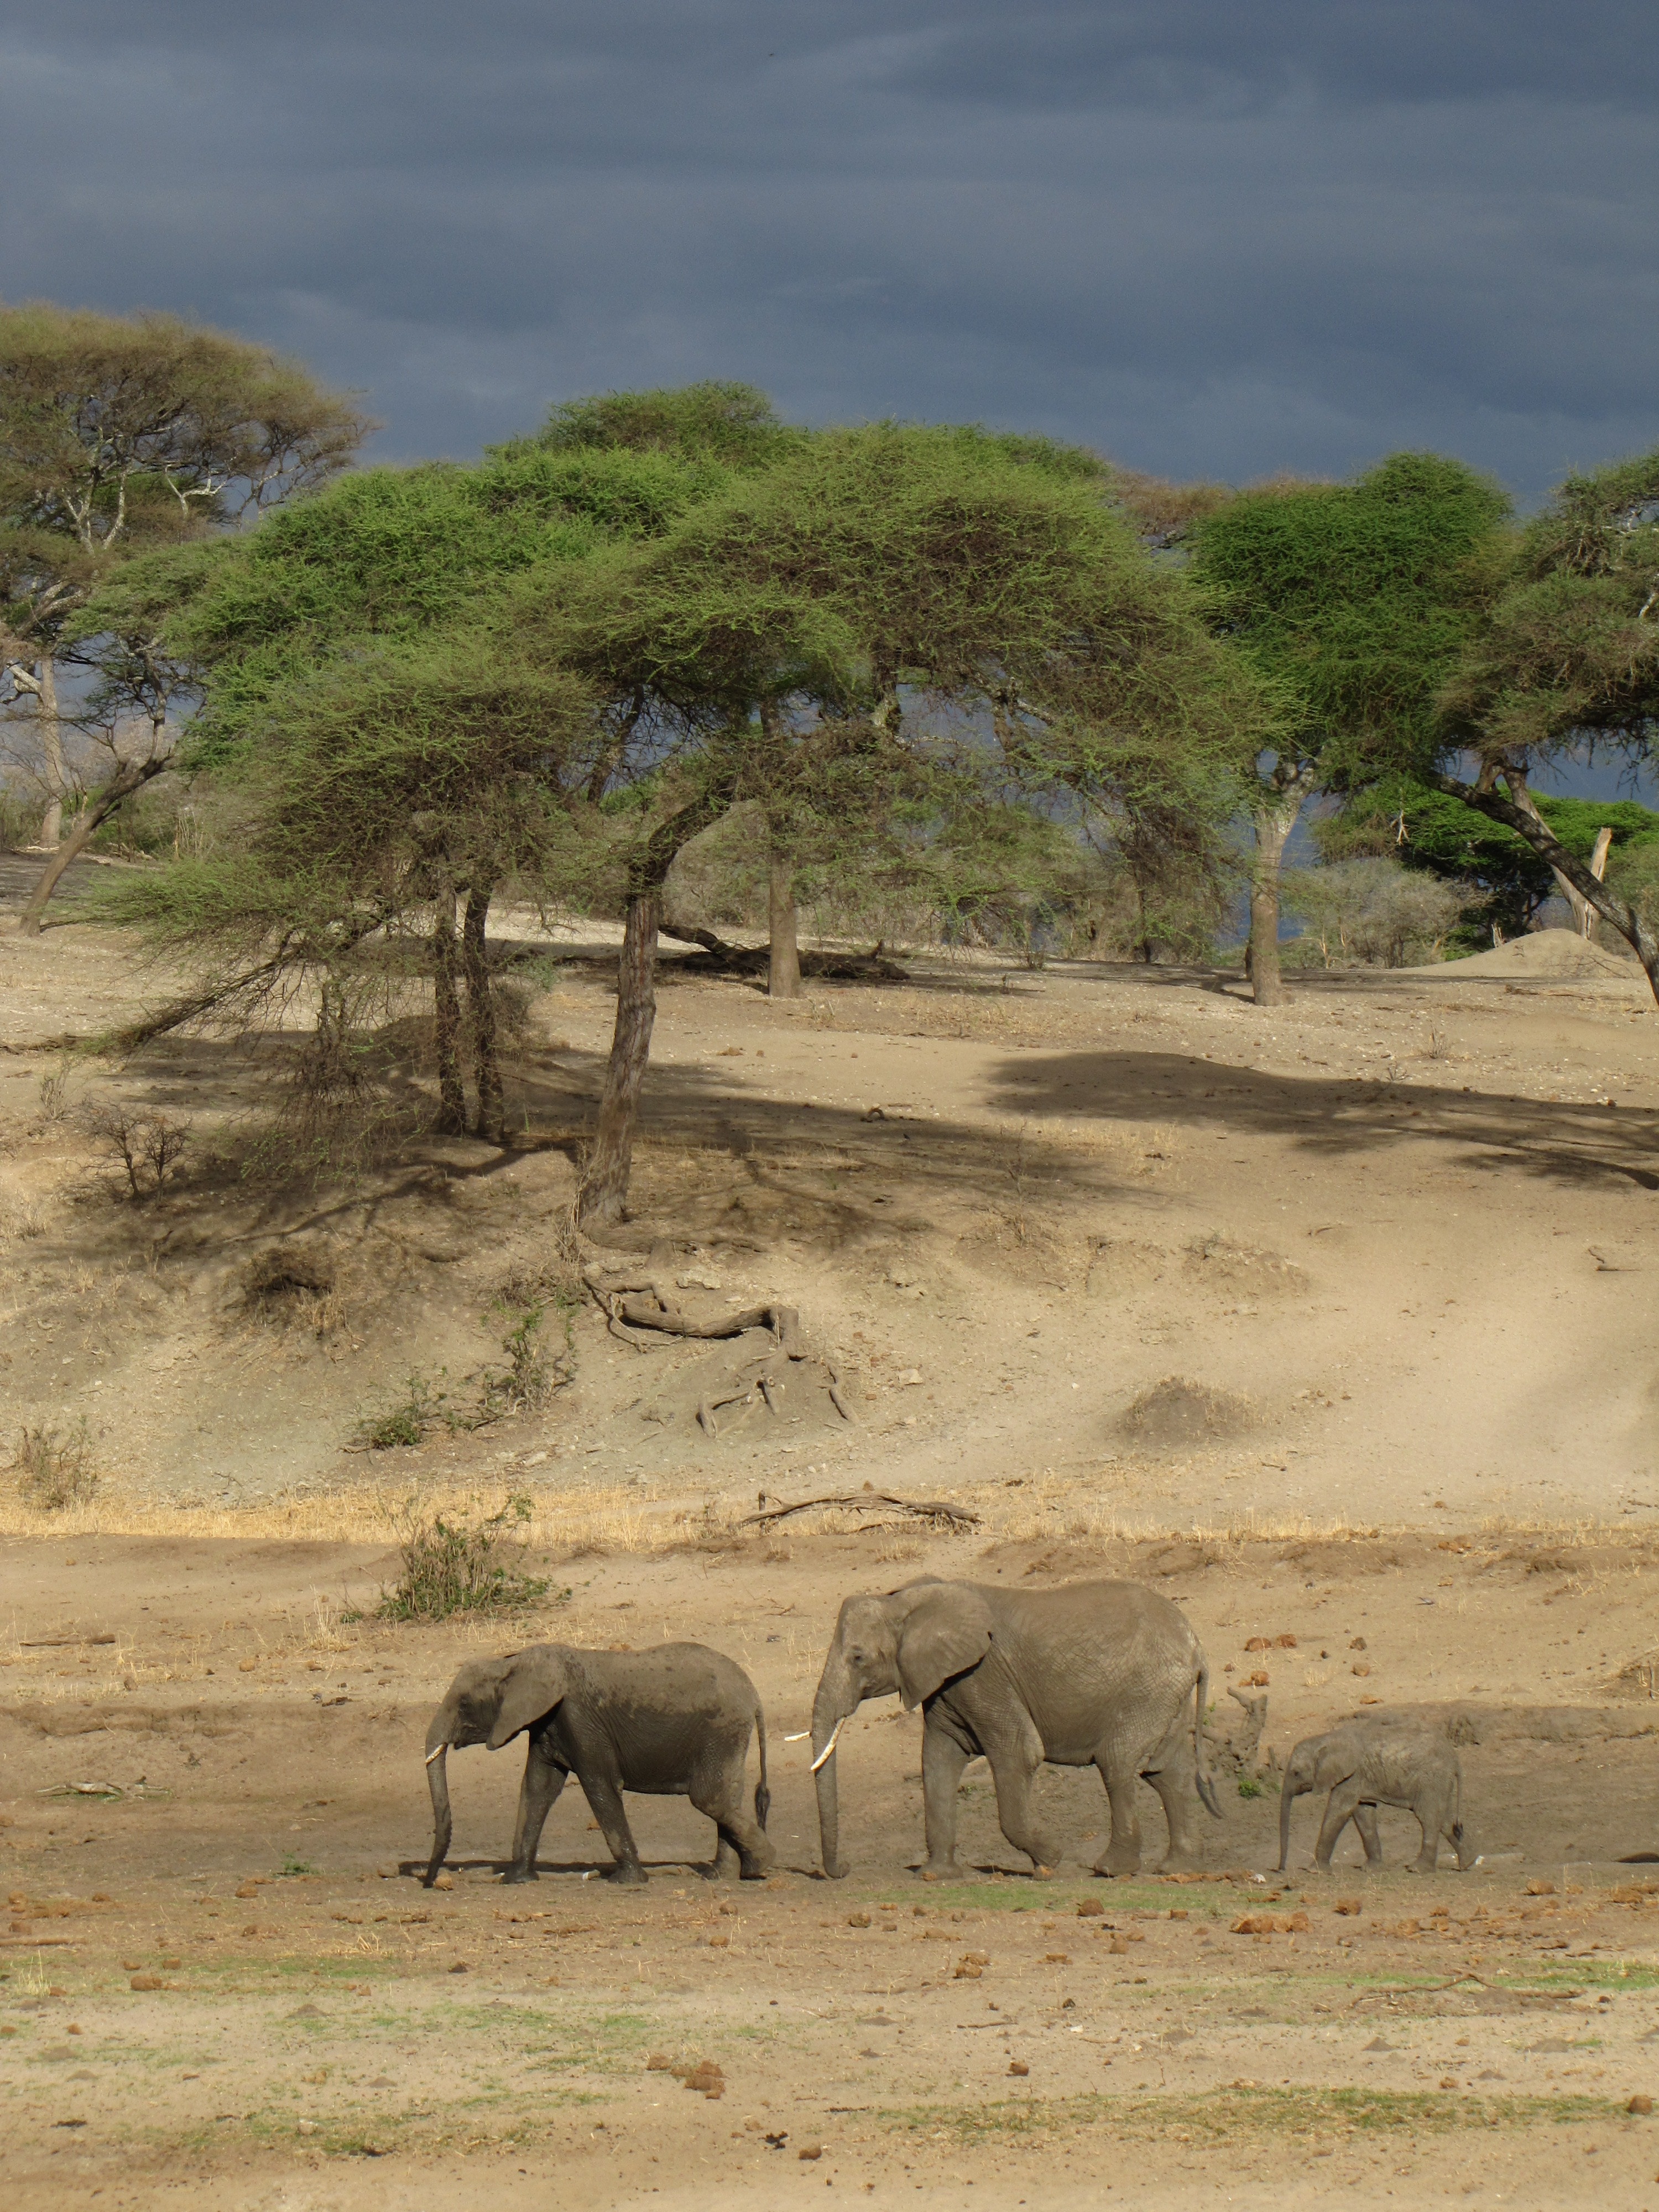 three gray elephants walking on desert during day time